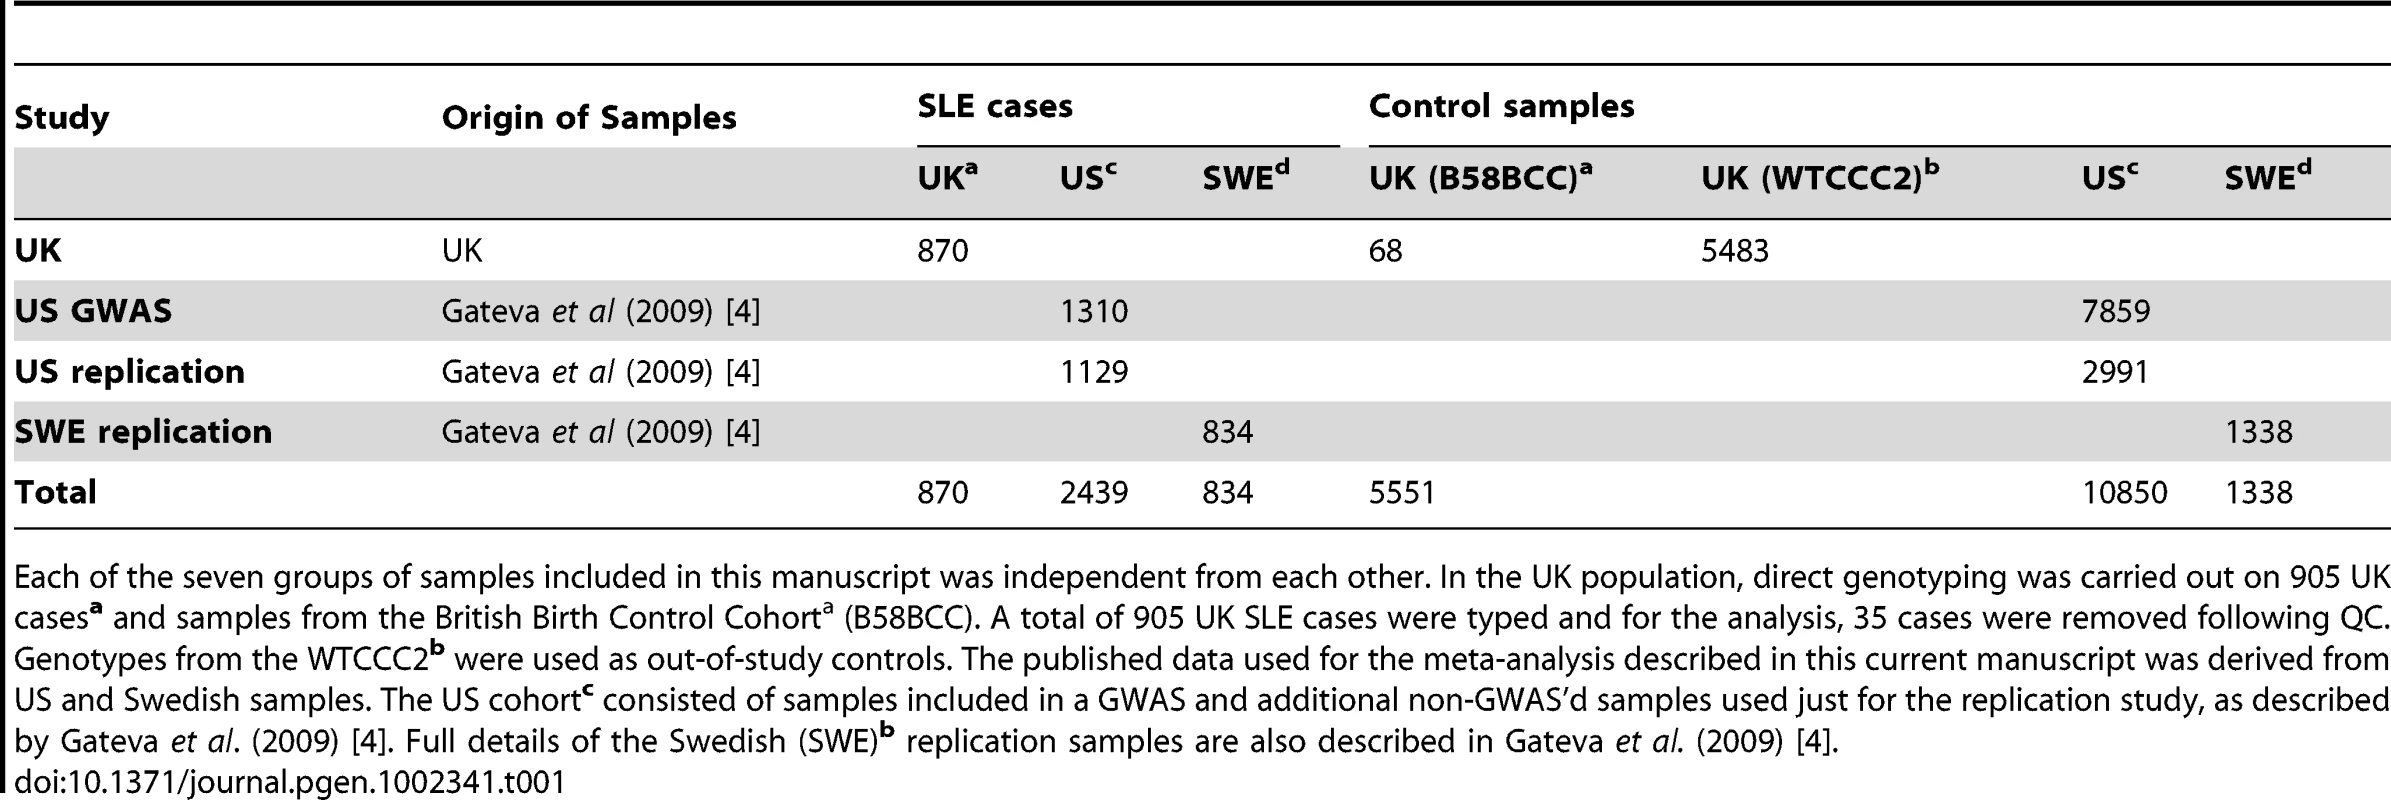 SLE Case-Control Study Cohorts used in the study.